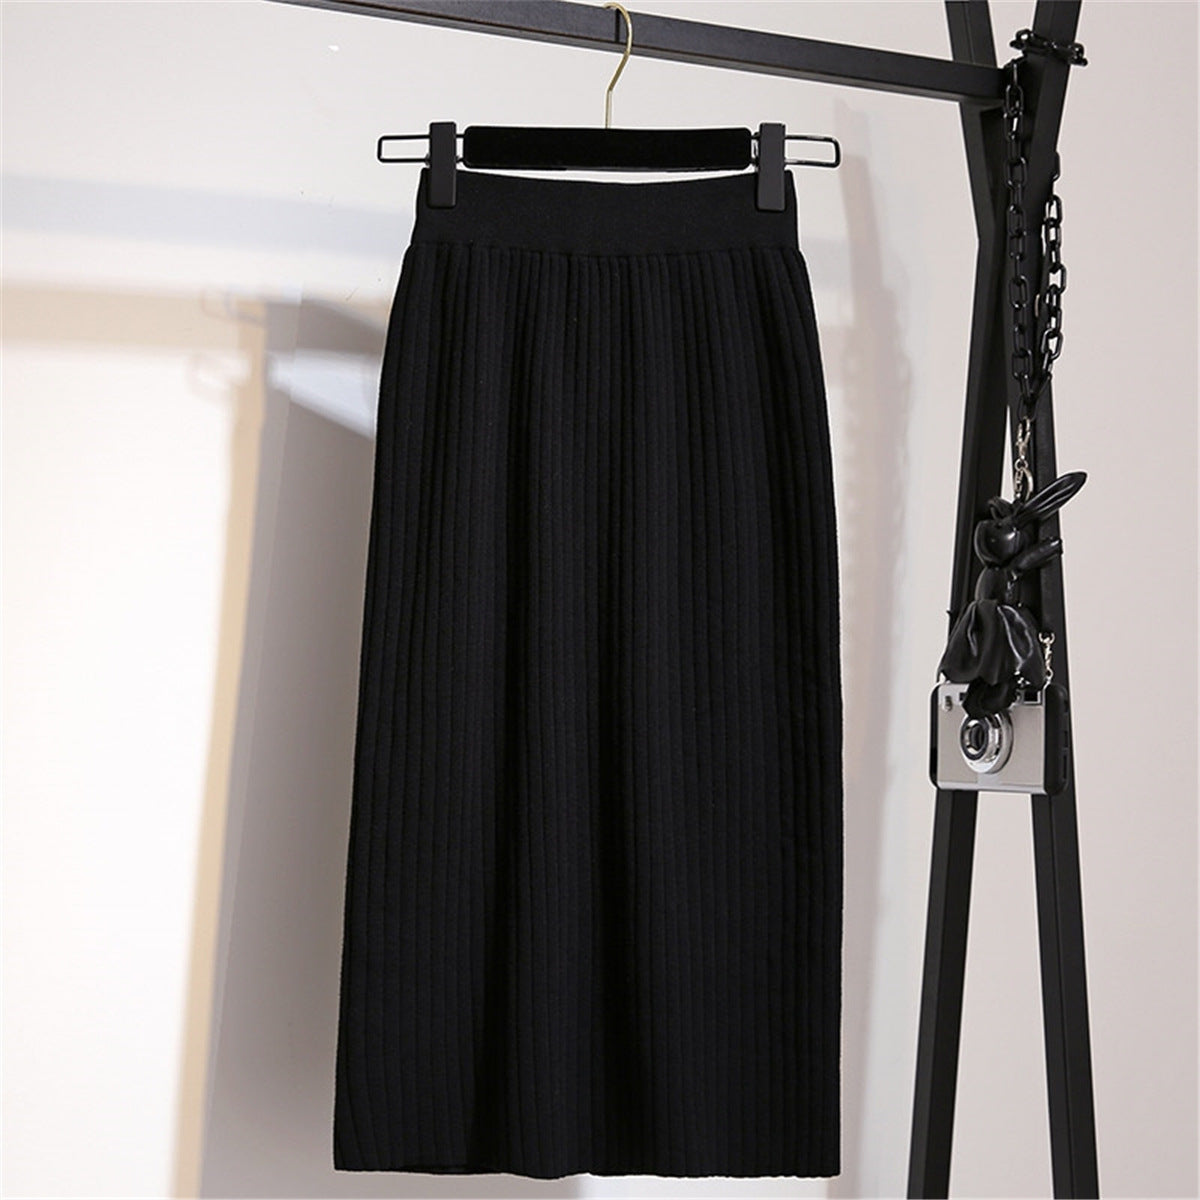 Autumn and winter skirt female long section 2021 new high backpa hip skirt boating first step Korean version of the pure color